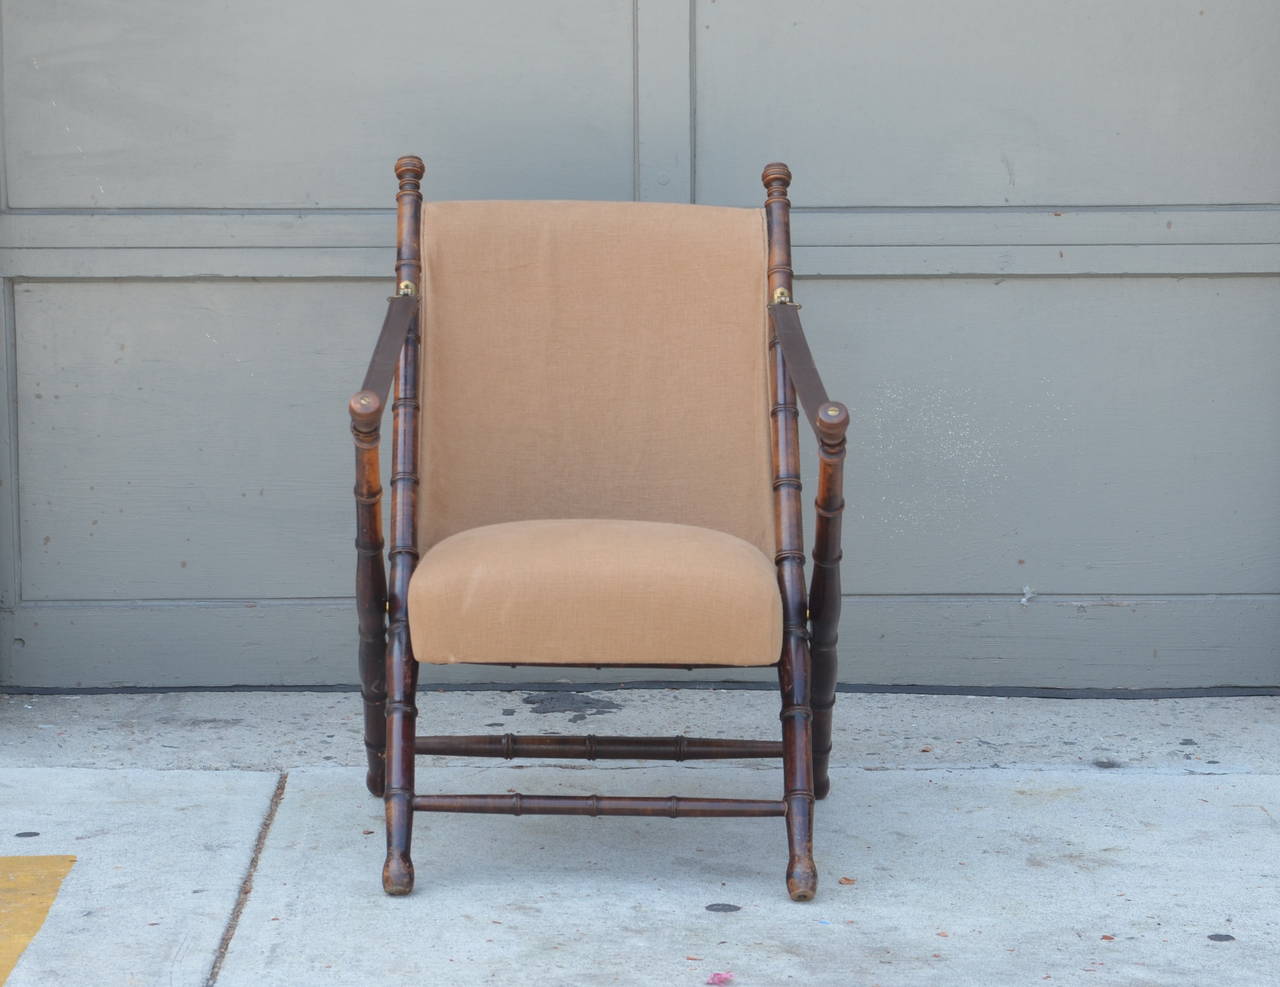 Pair of turned wood, linen and leather Campaign chairs by Maison Jansen.

Measures: Arm height 23